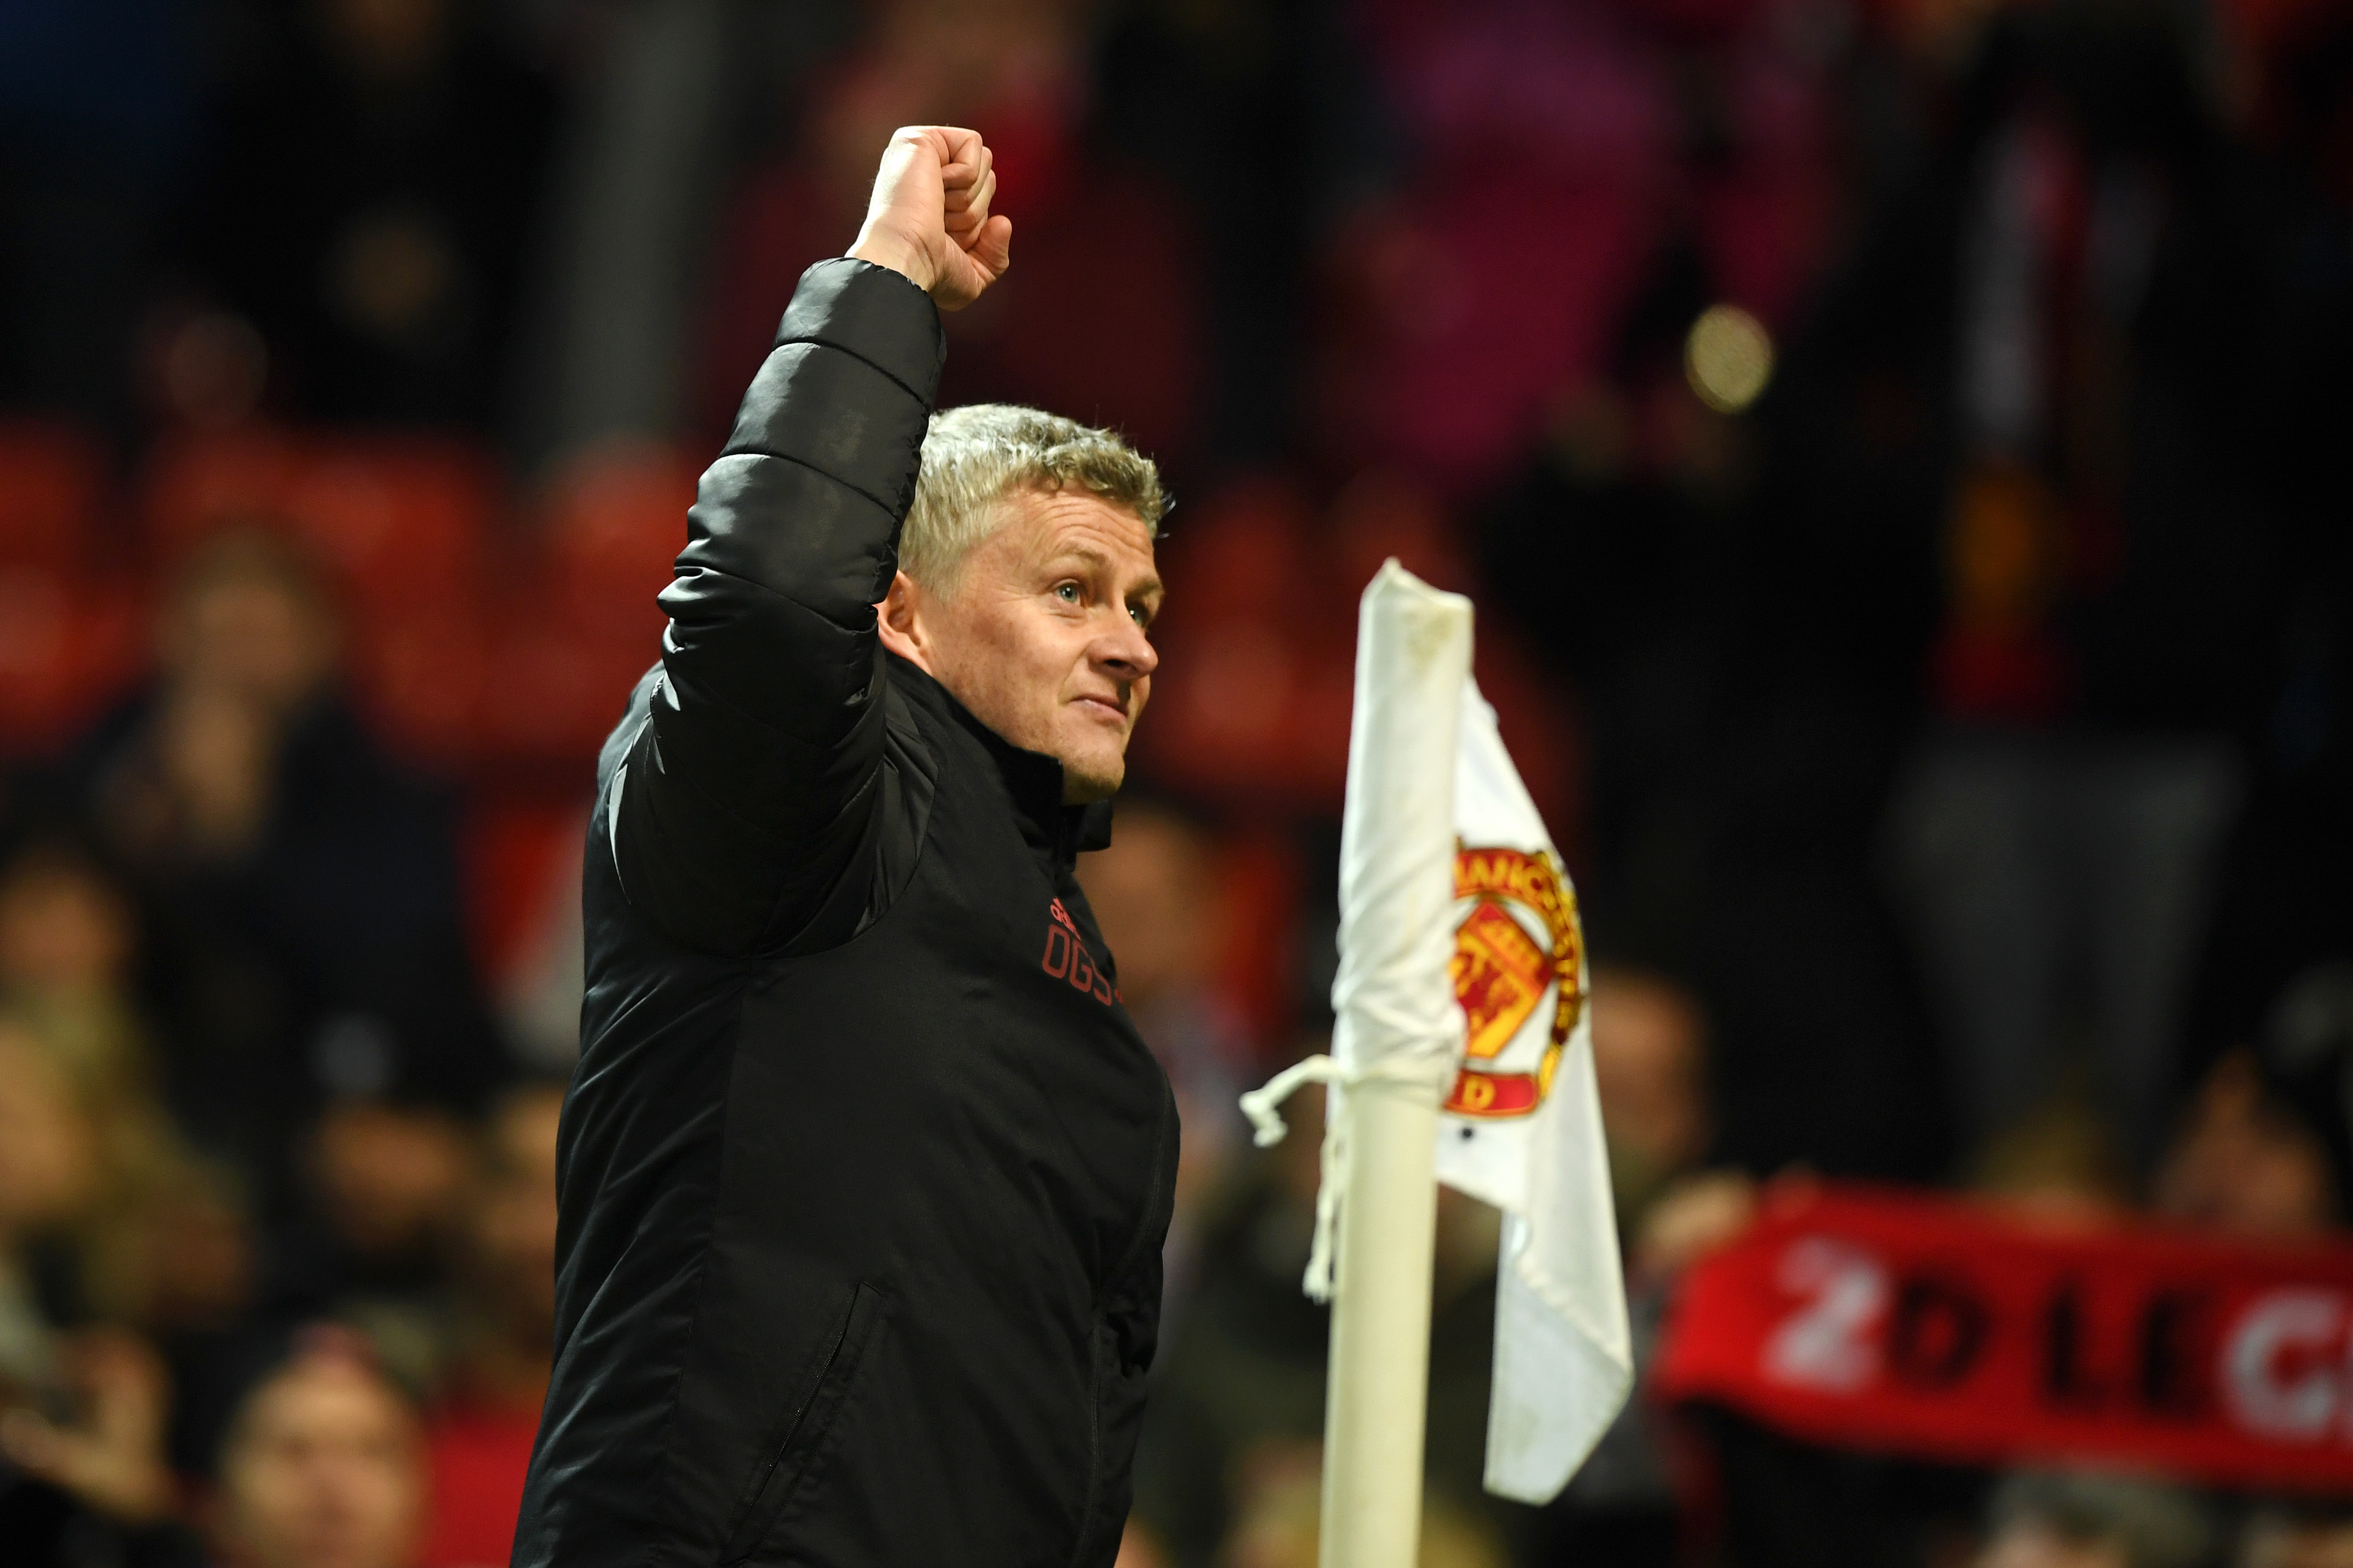 MANCHESTER, ENGLAND - JANUARY 19:  Ole Gunnar Solskjaer, Interim Manager of Manchester United celebrates following the Premier League match between Manchester United and Brighton & Hove Albion at Old Trafford on January 19, 2019 in Manchester, United Kingdom.  (Photo by Gareth Copley/Getty Images)